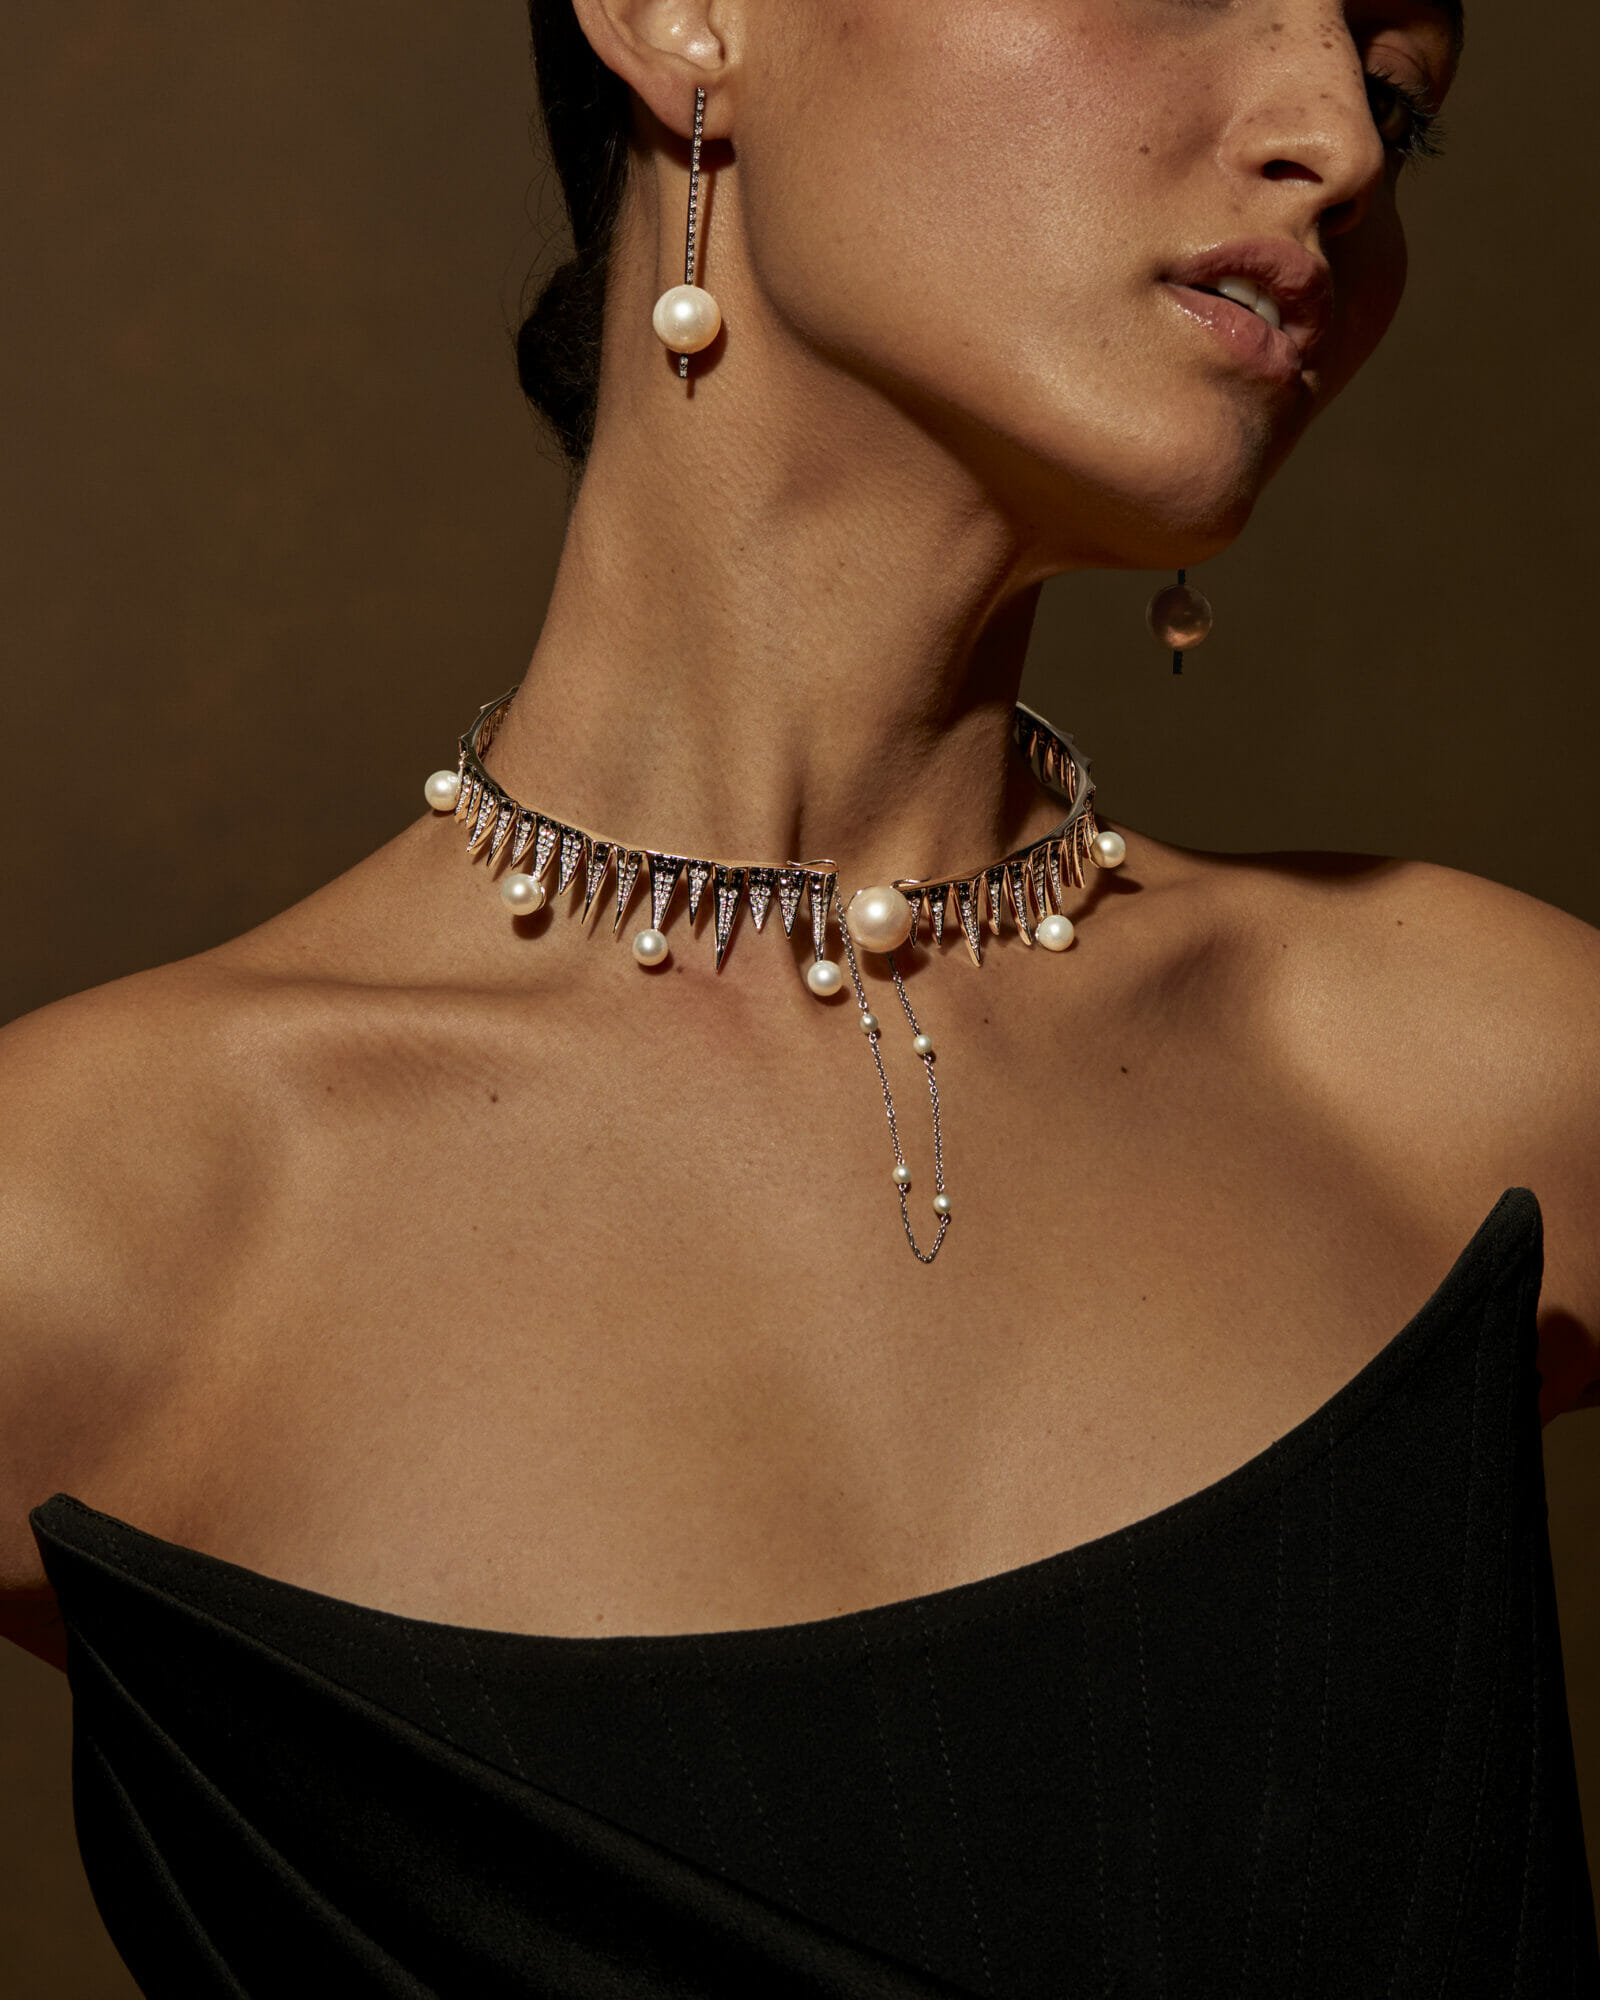 Diamonds and pearls, woman wearing earrings and collar necklace